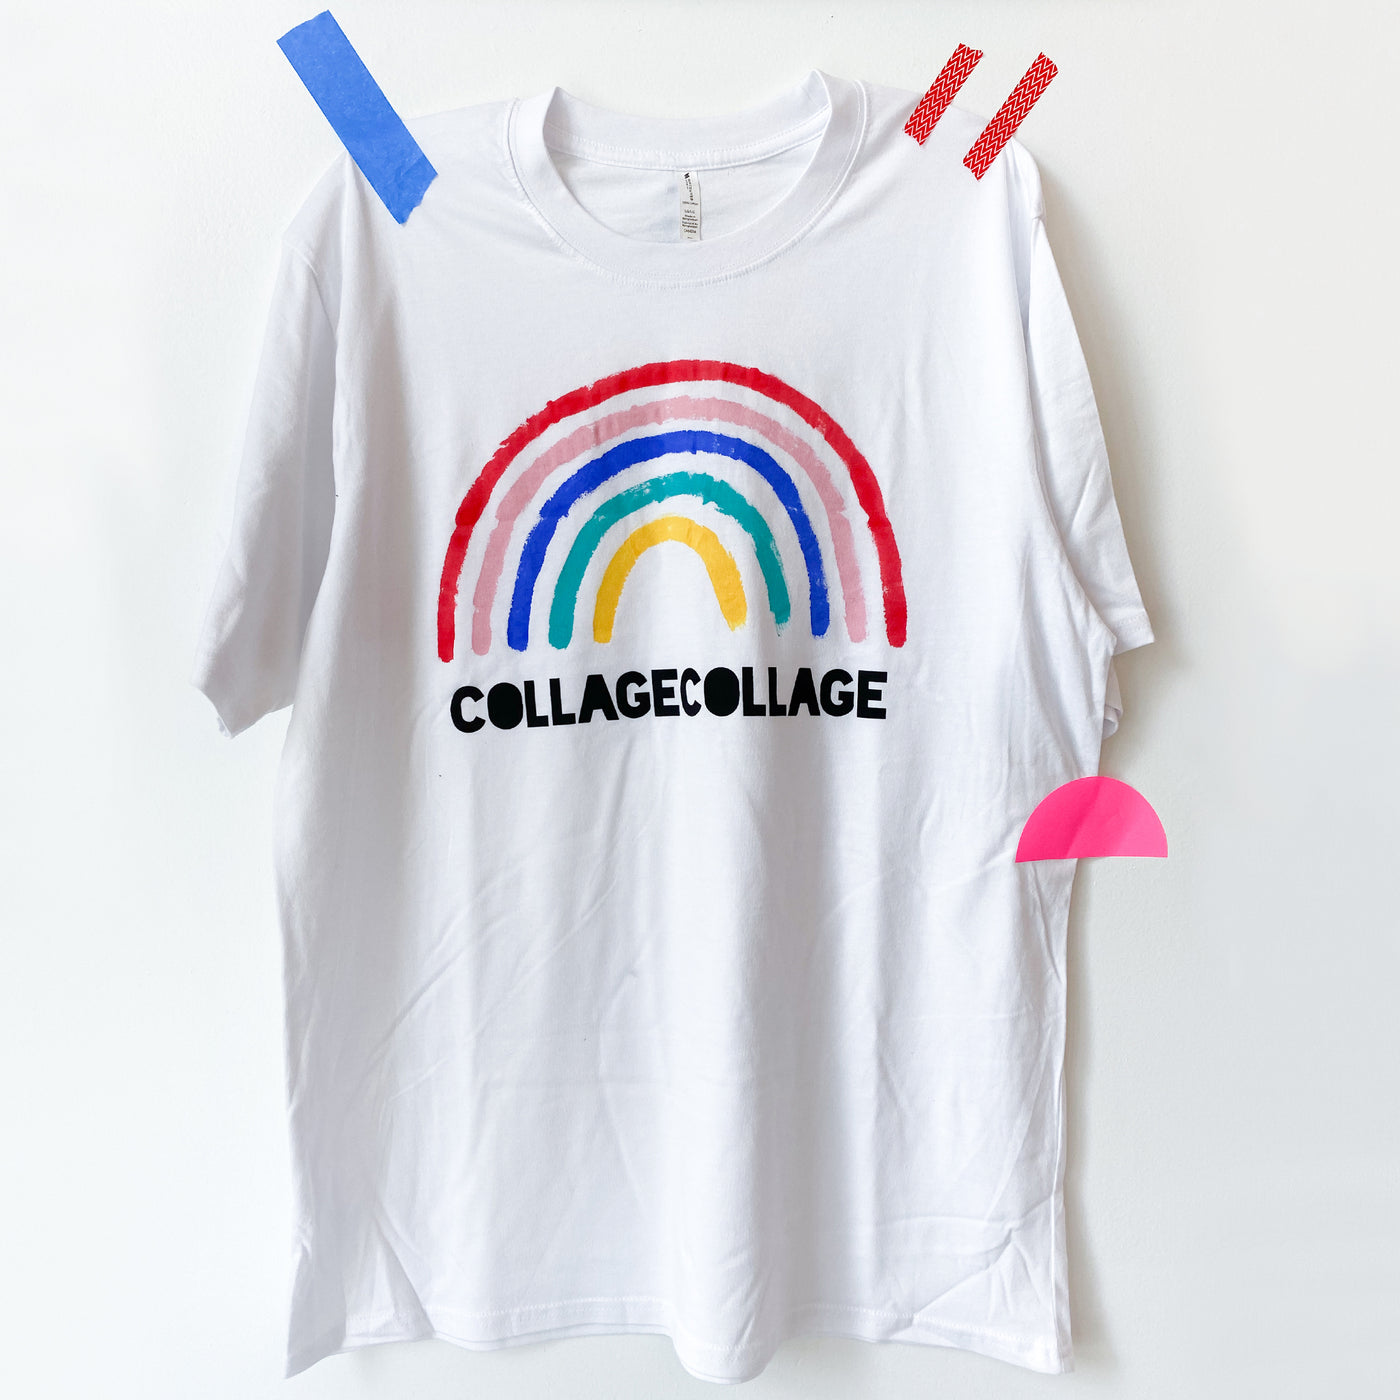 Collage Collage rainbow t-shirt in adult size large